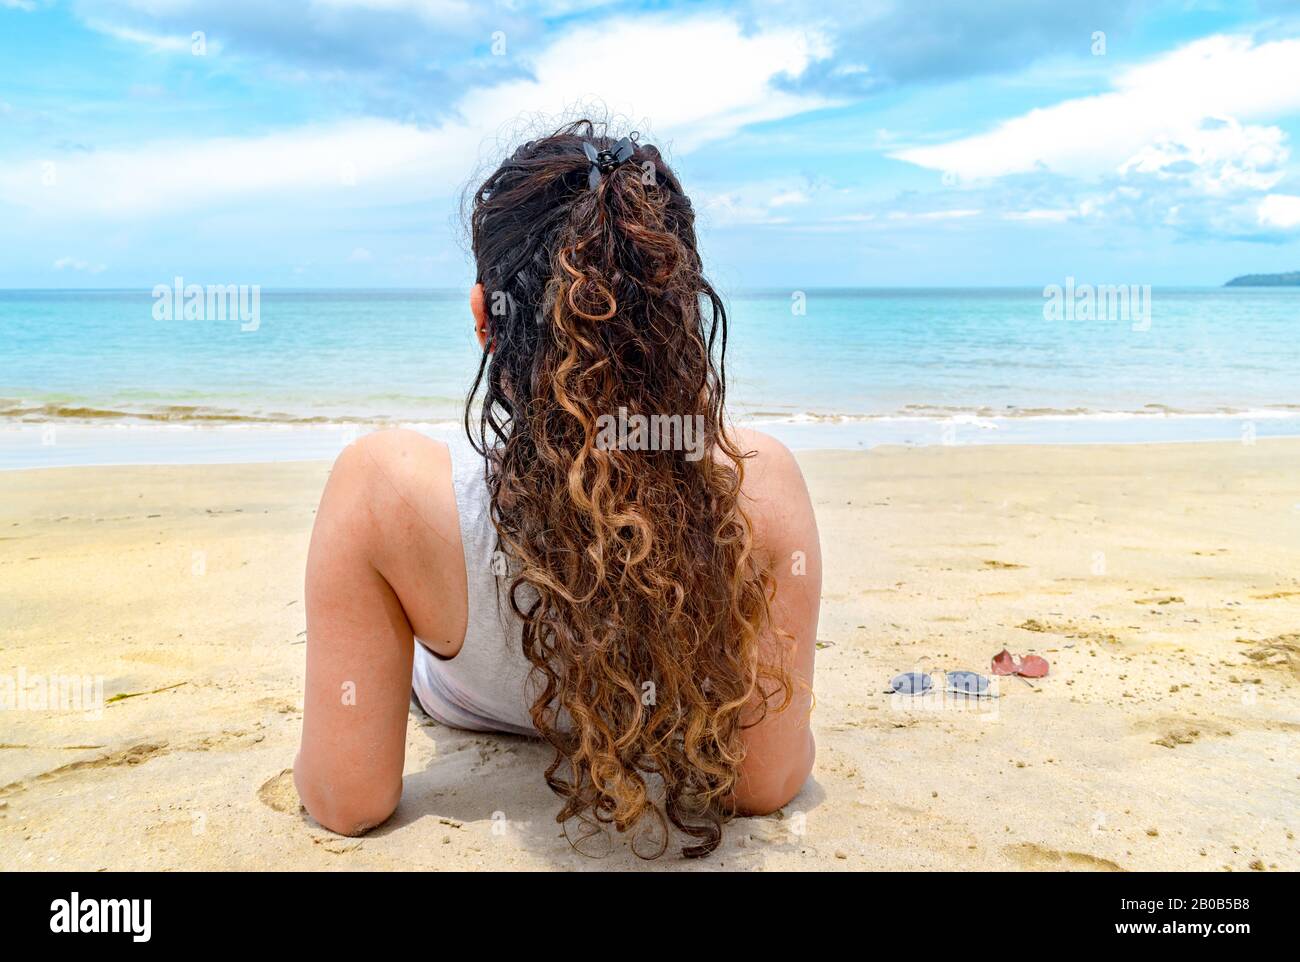 Back view of attractive female model enjoying her holidays beach. She has beautiful hairstyle with colored curly hair and flawless skin getting tanned Stock Photo